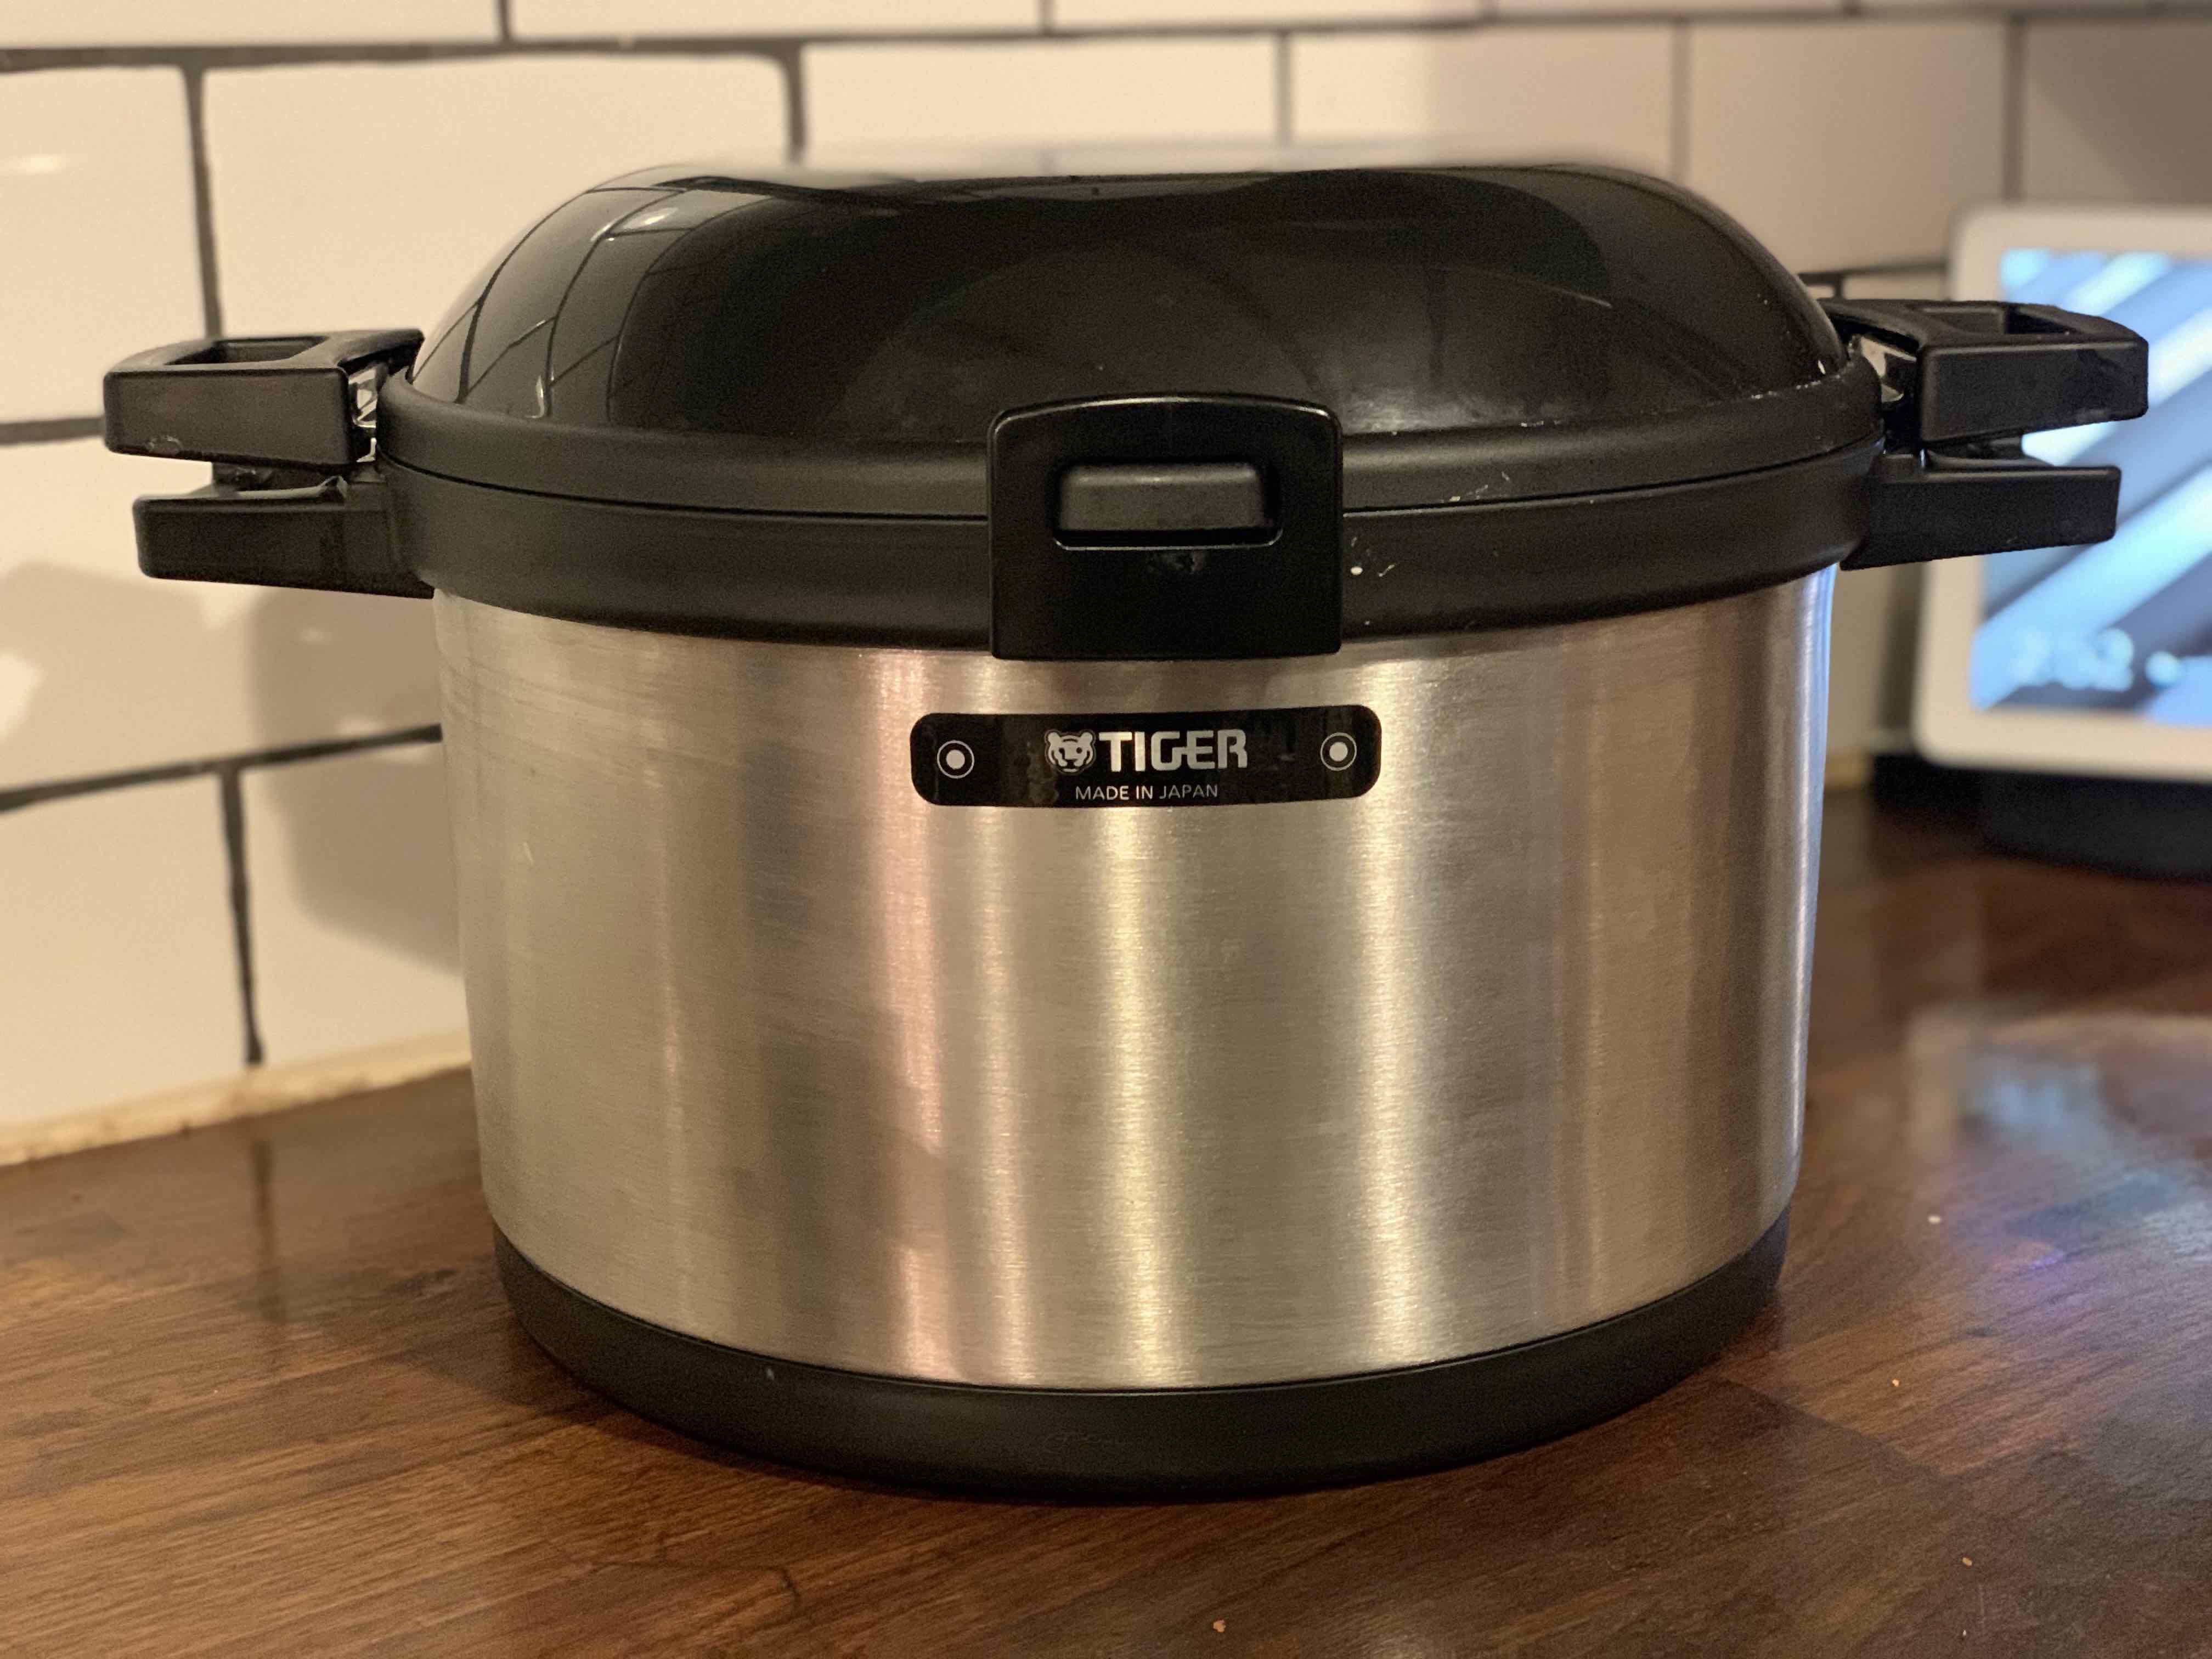 Tiger insulated cooker review